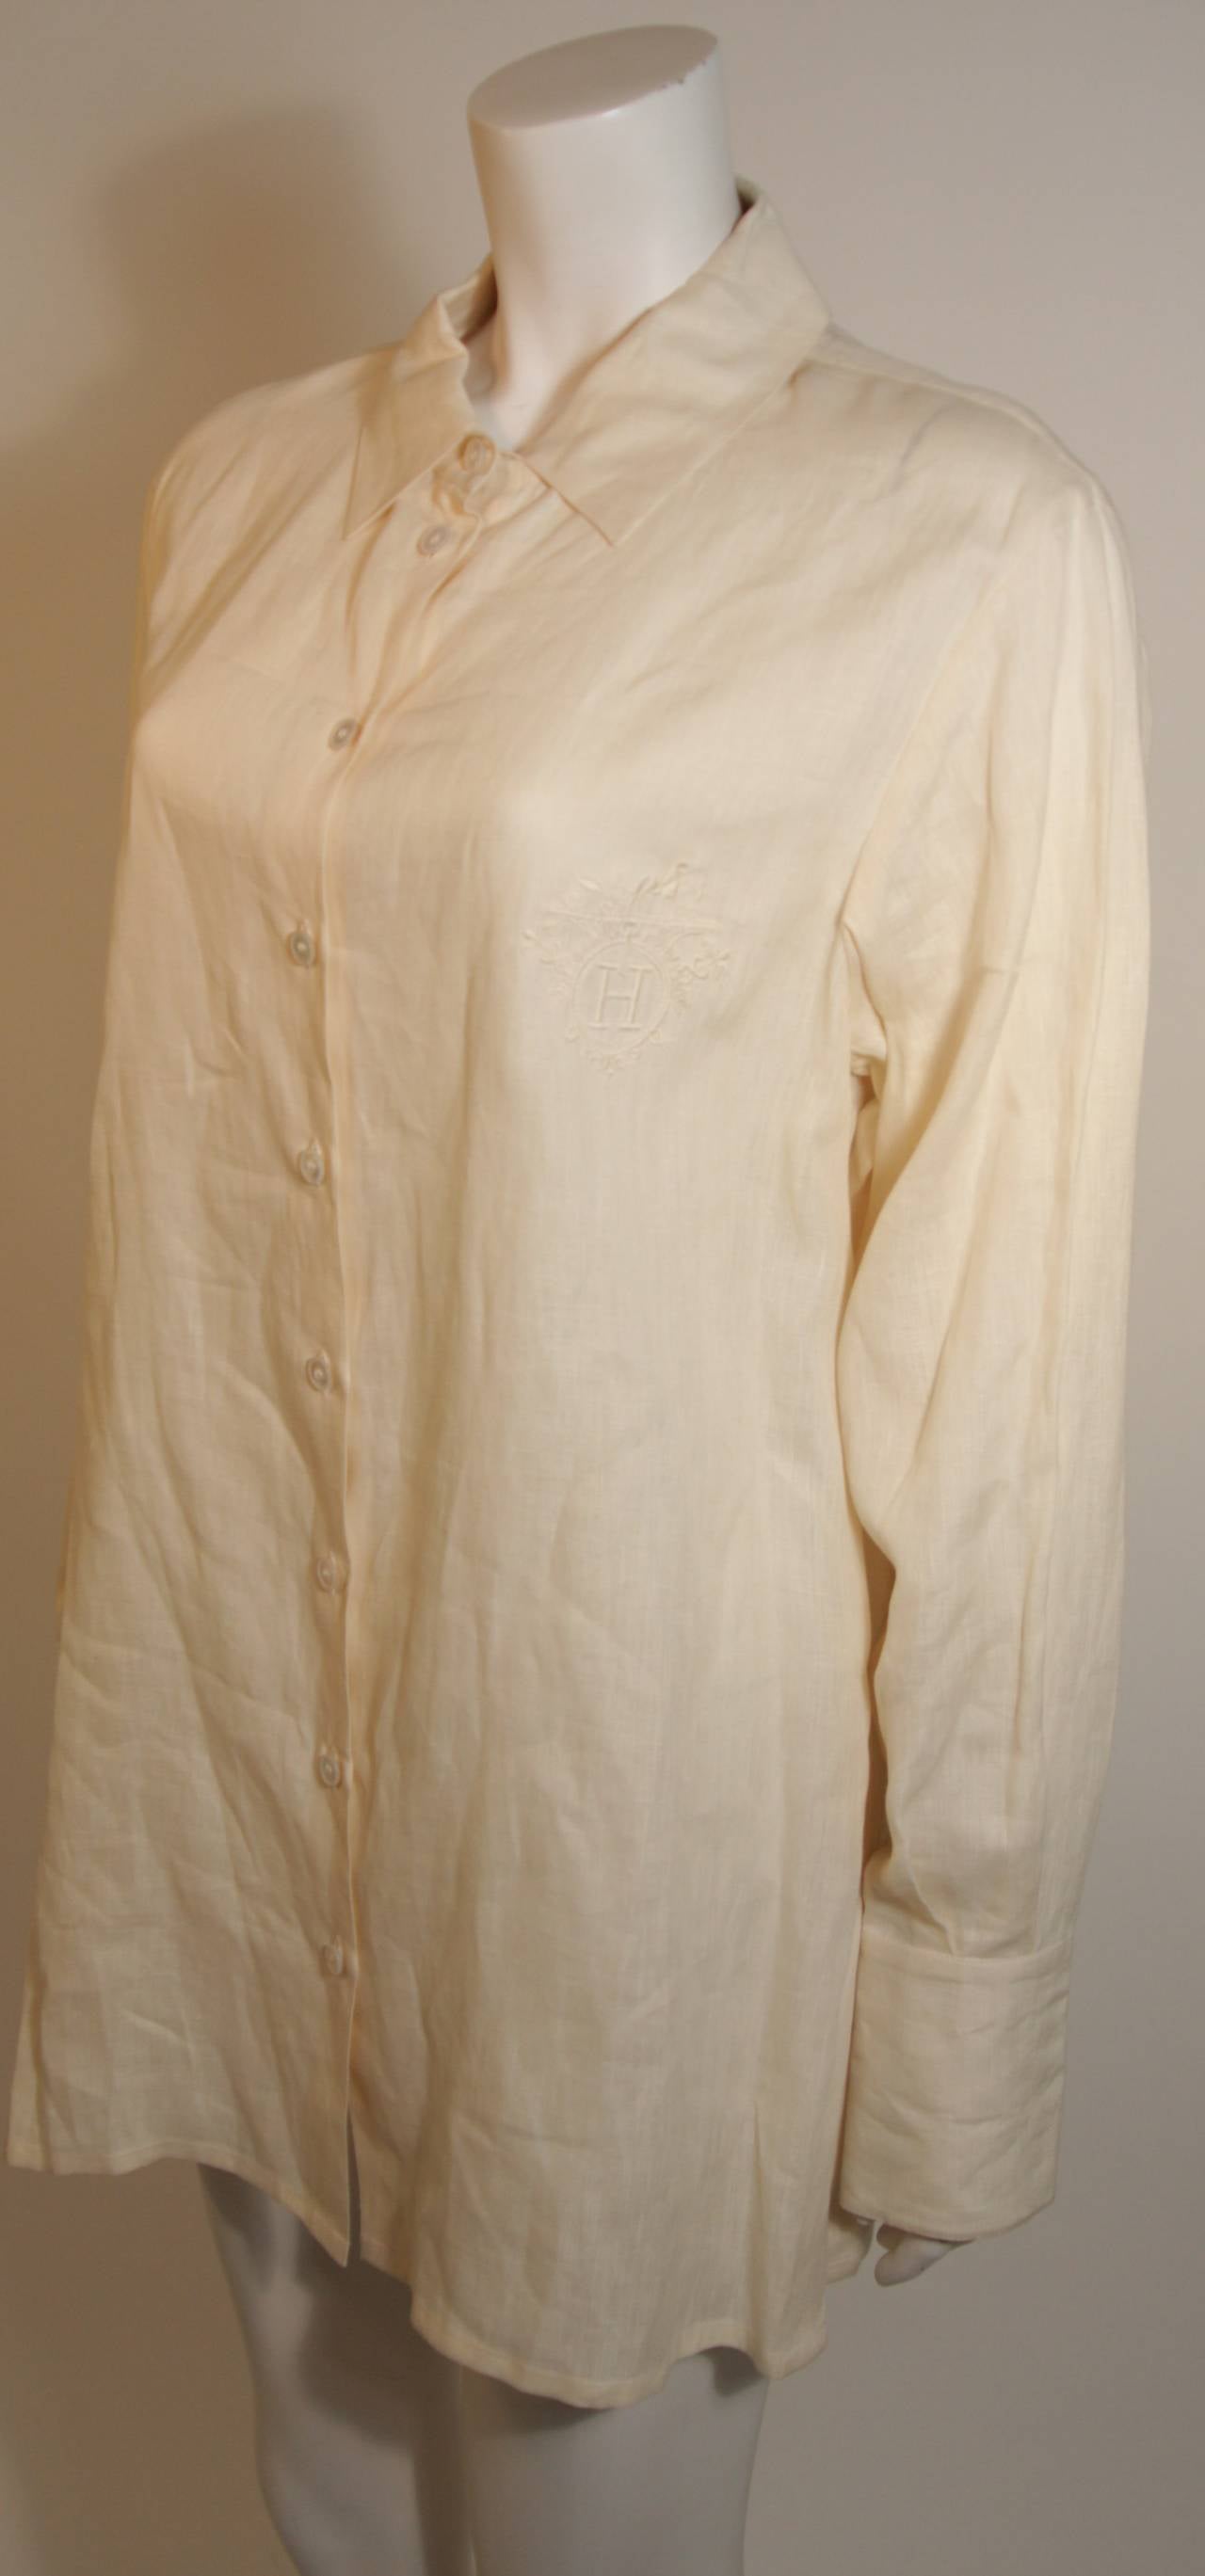 Hermes Linen Shirt with Original Tags Size 46 1